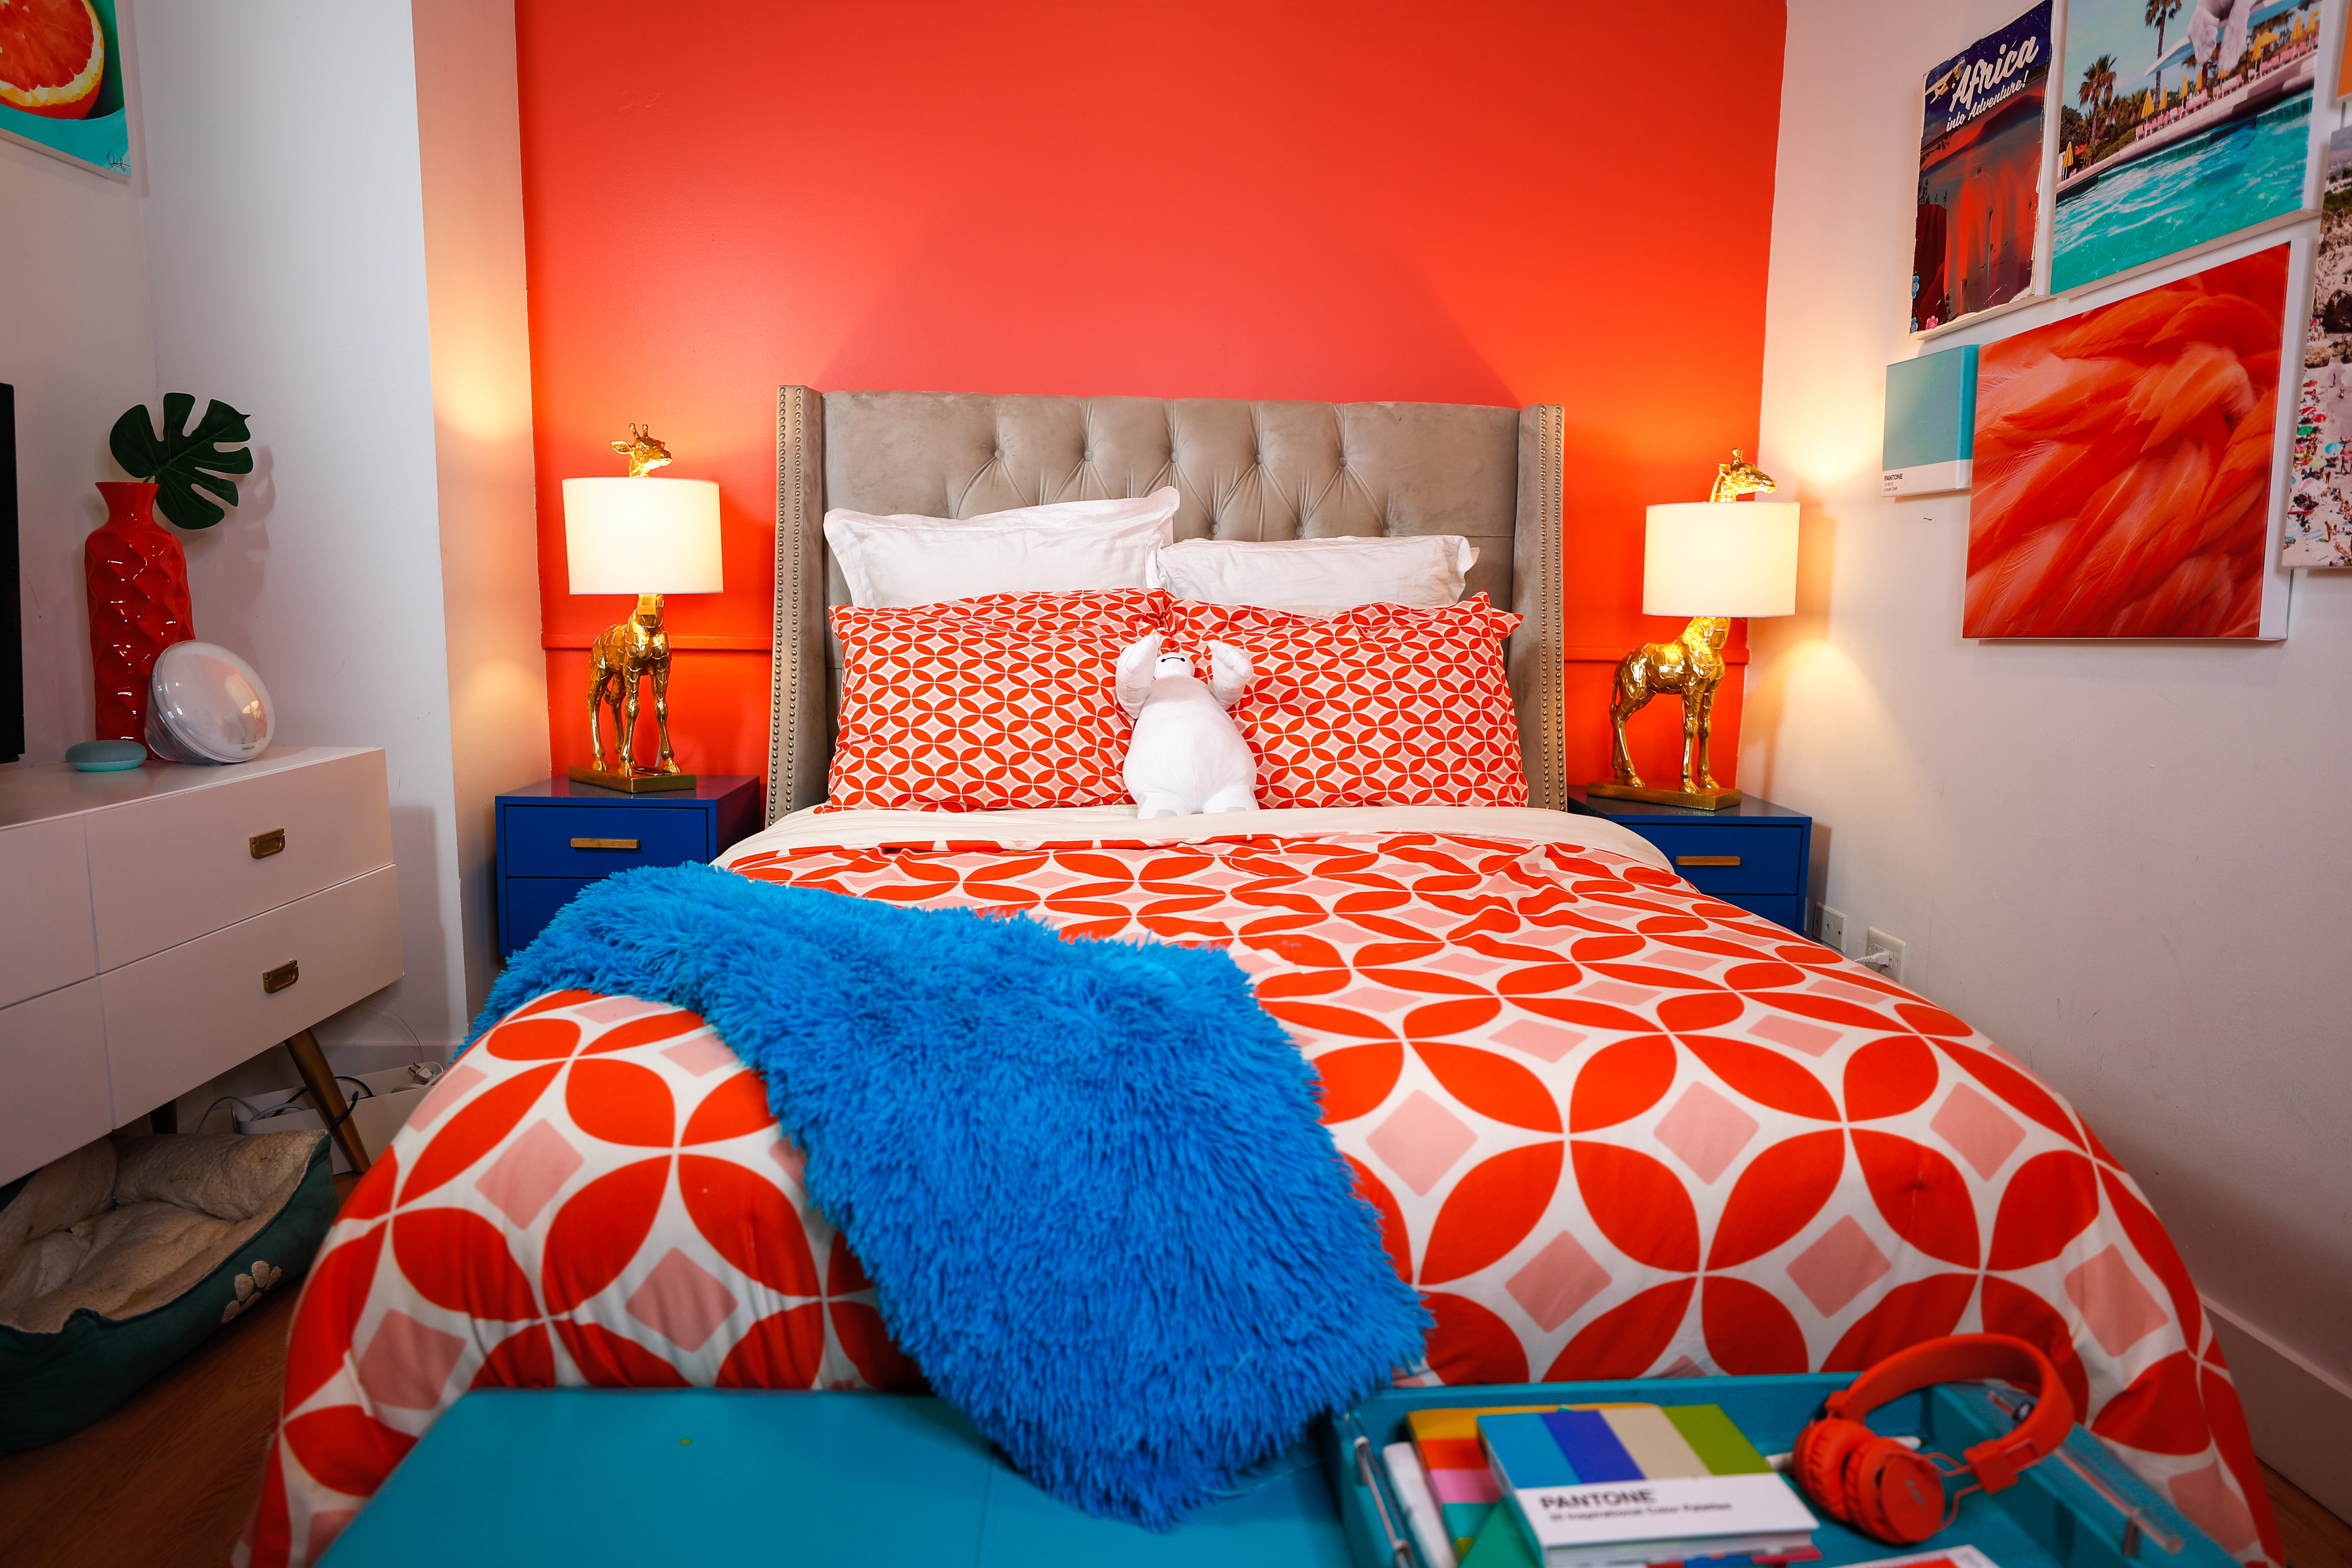 Mellow Coral Walls In The Master Bedroom